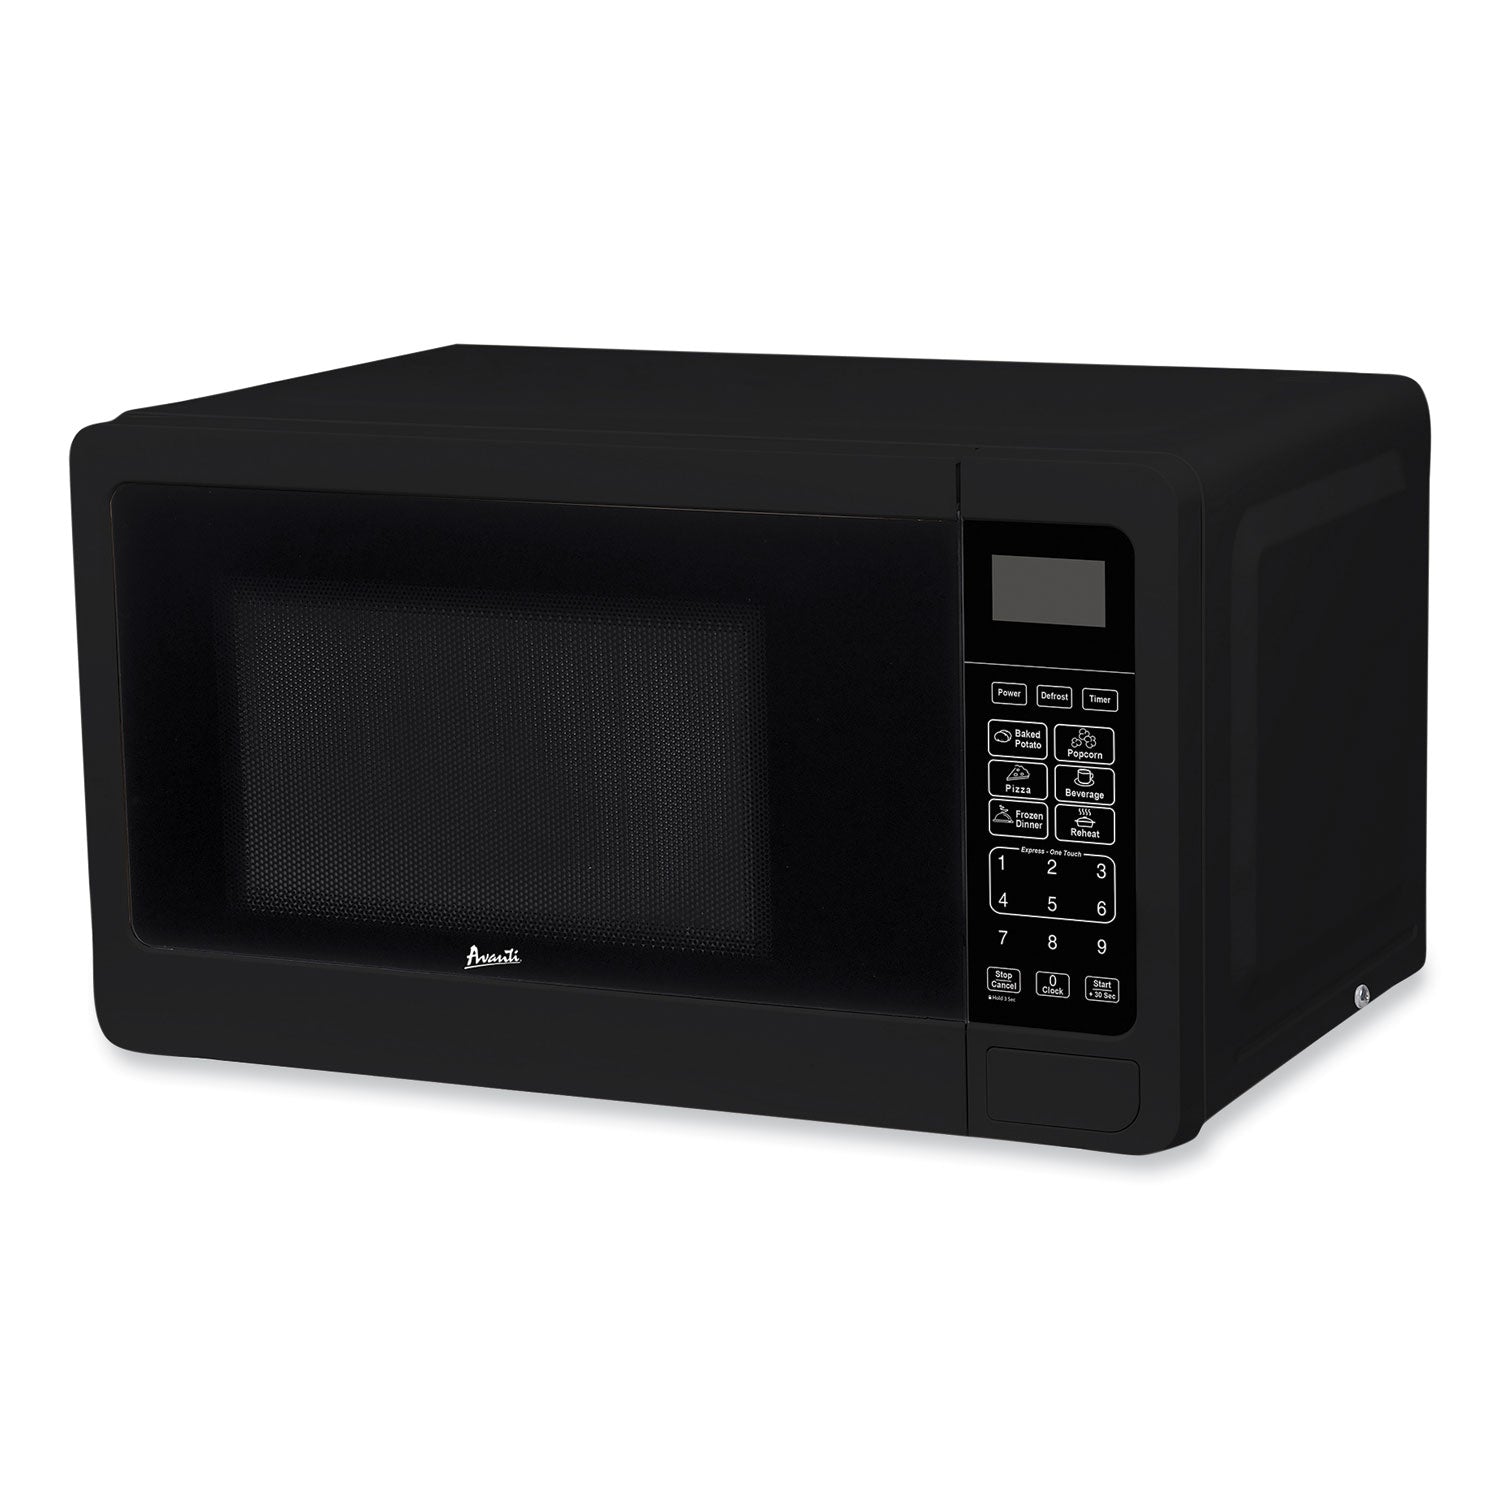 07-cu-ft-microwave-oven-700-watts-black_avamt7v1b - 1